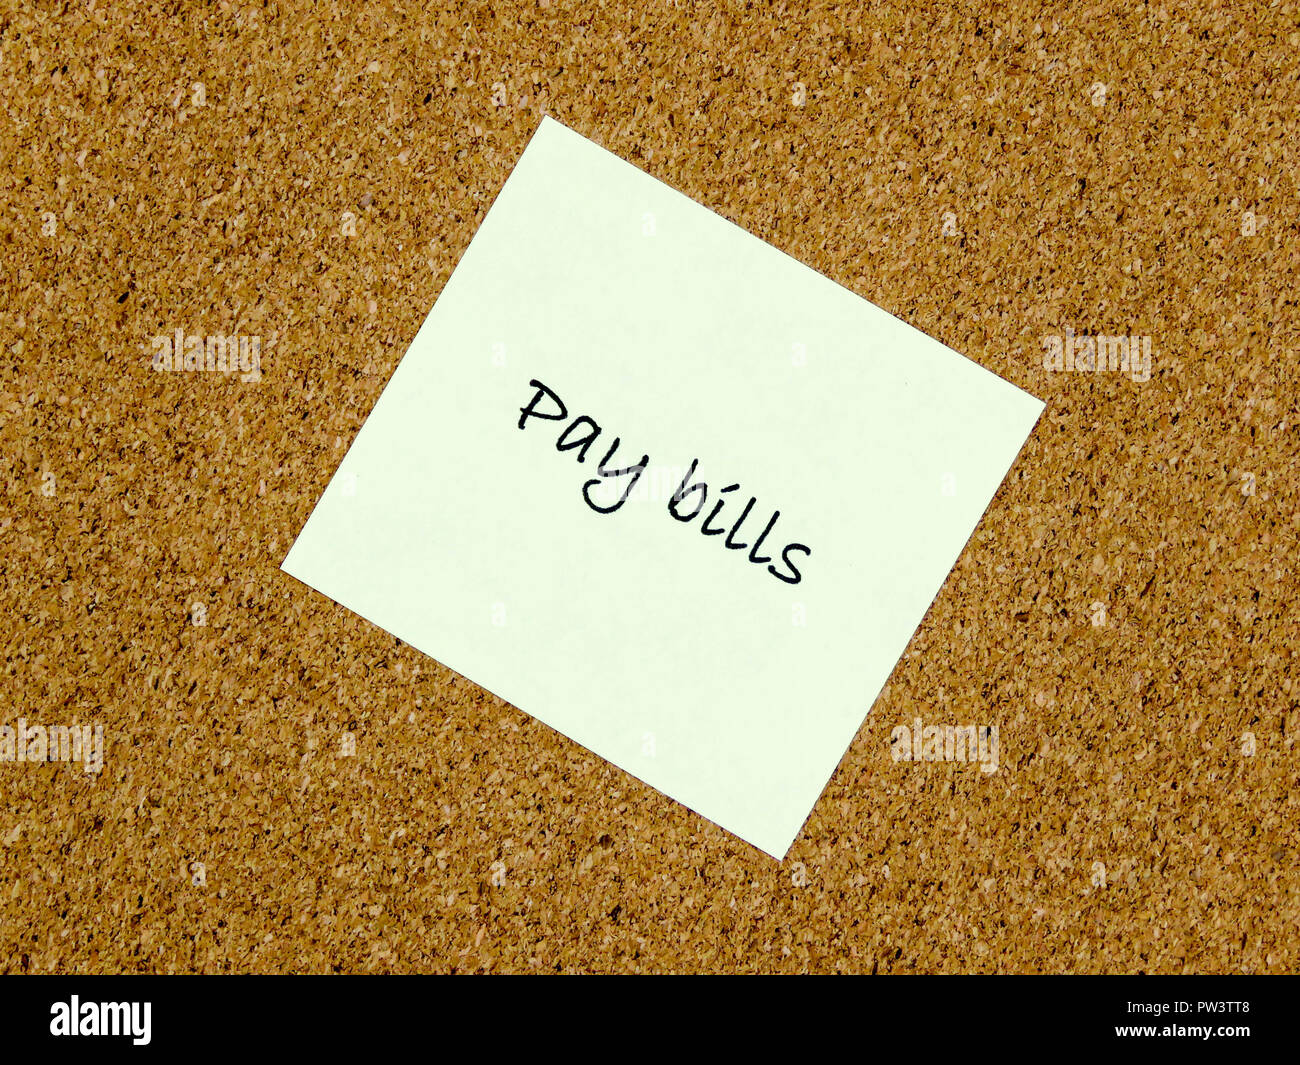 A yellow sticky note with pay bills written on it on a cork board background Stock Photo